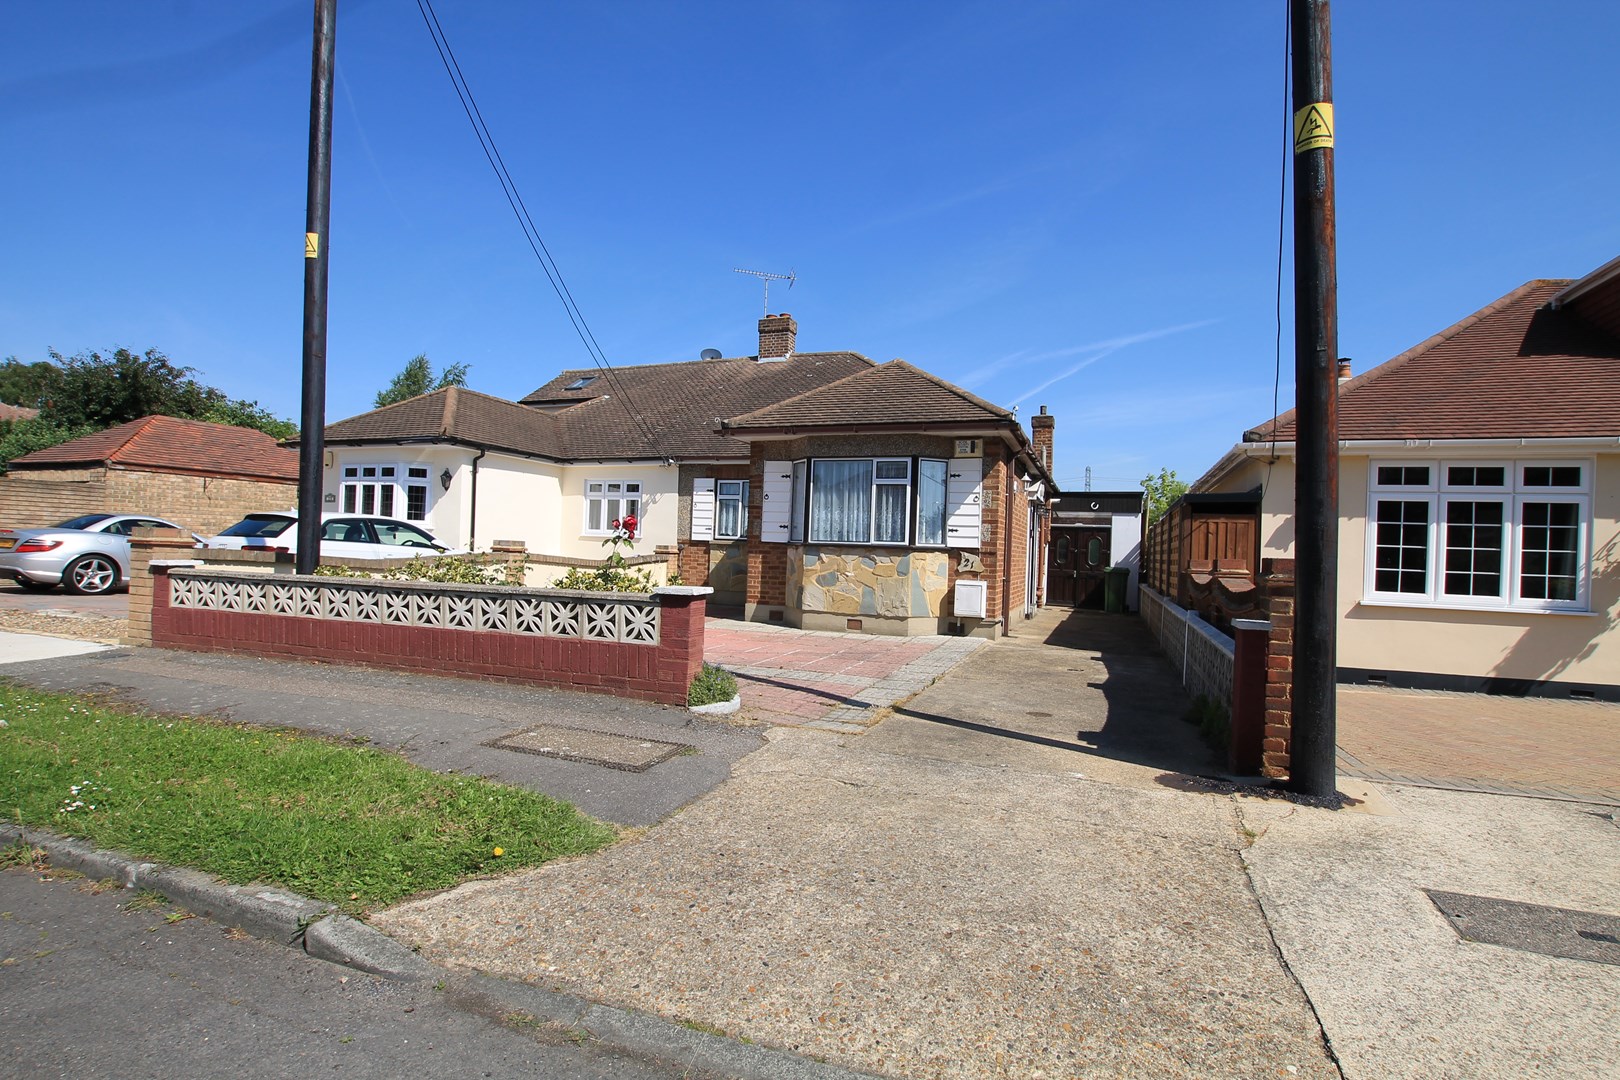 Search For Investment Property In Upminster Cranham North